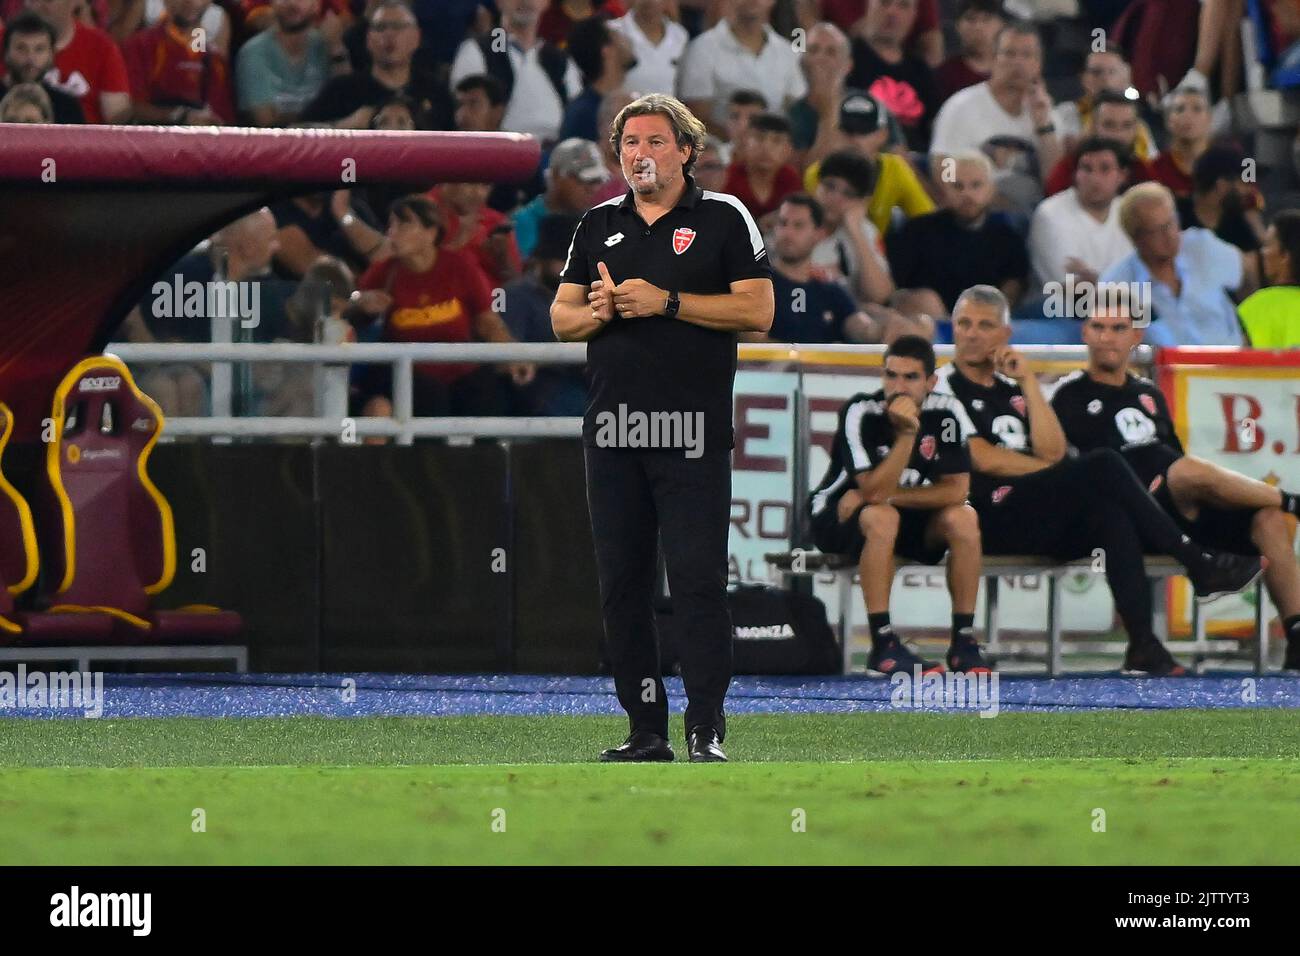 Giovanni Stroppa of A.C. Monza  during the 4th day of the Serie A Championship between A.S. Roma vs A.C. Monza on 30th August 2022 at the Stadio Olimpico in Rome, Italy. (Photo by Domenico Cippitelli/Pacific Press) Stock Photo